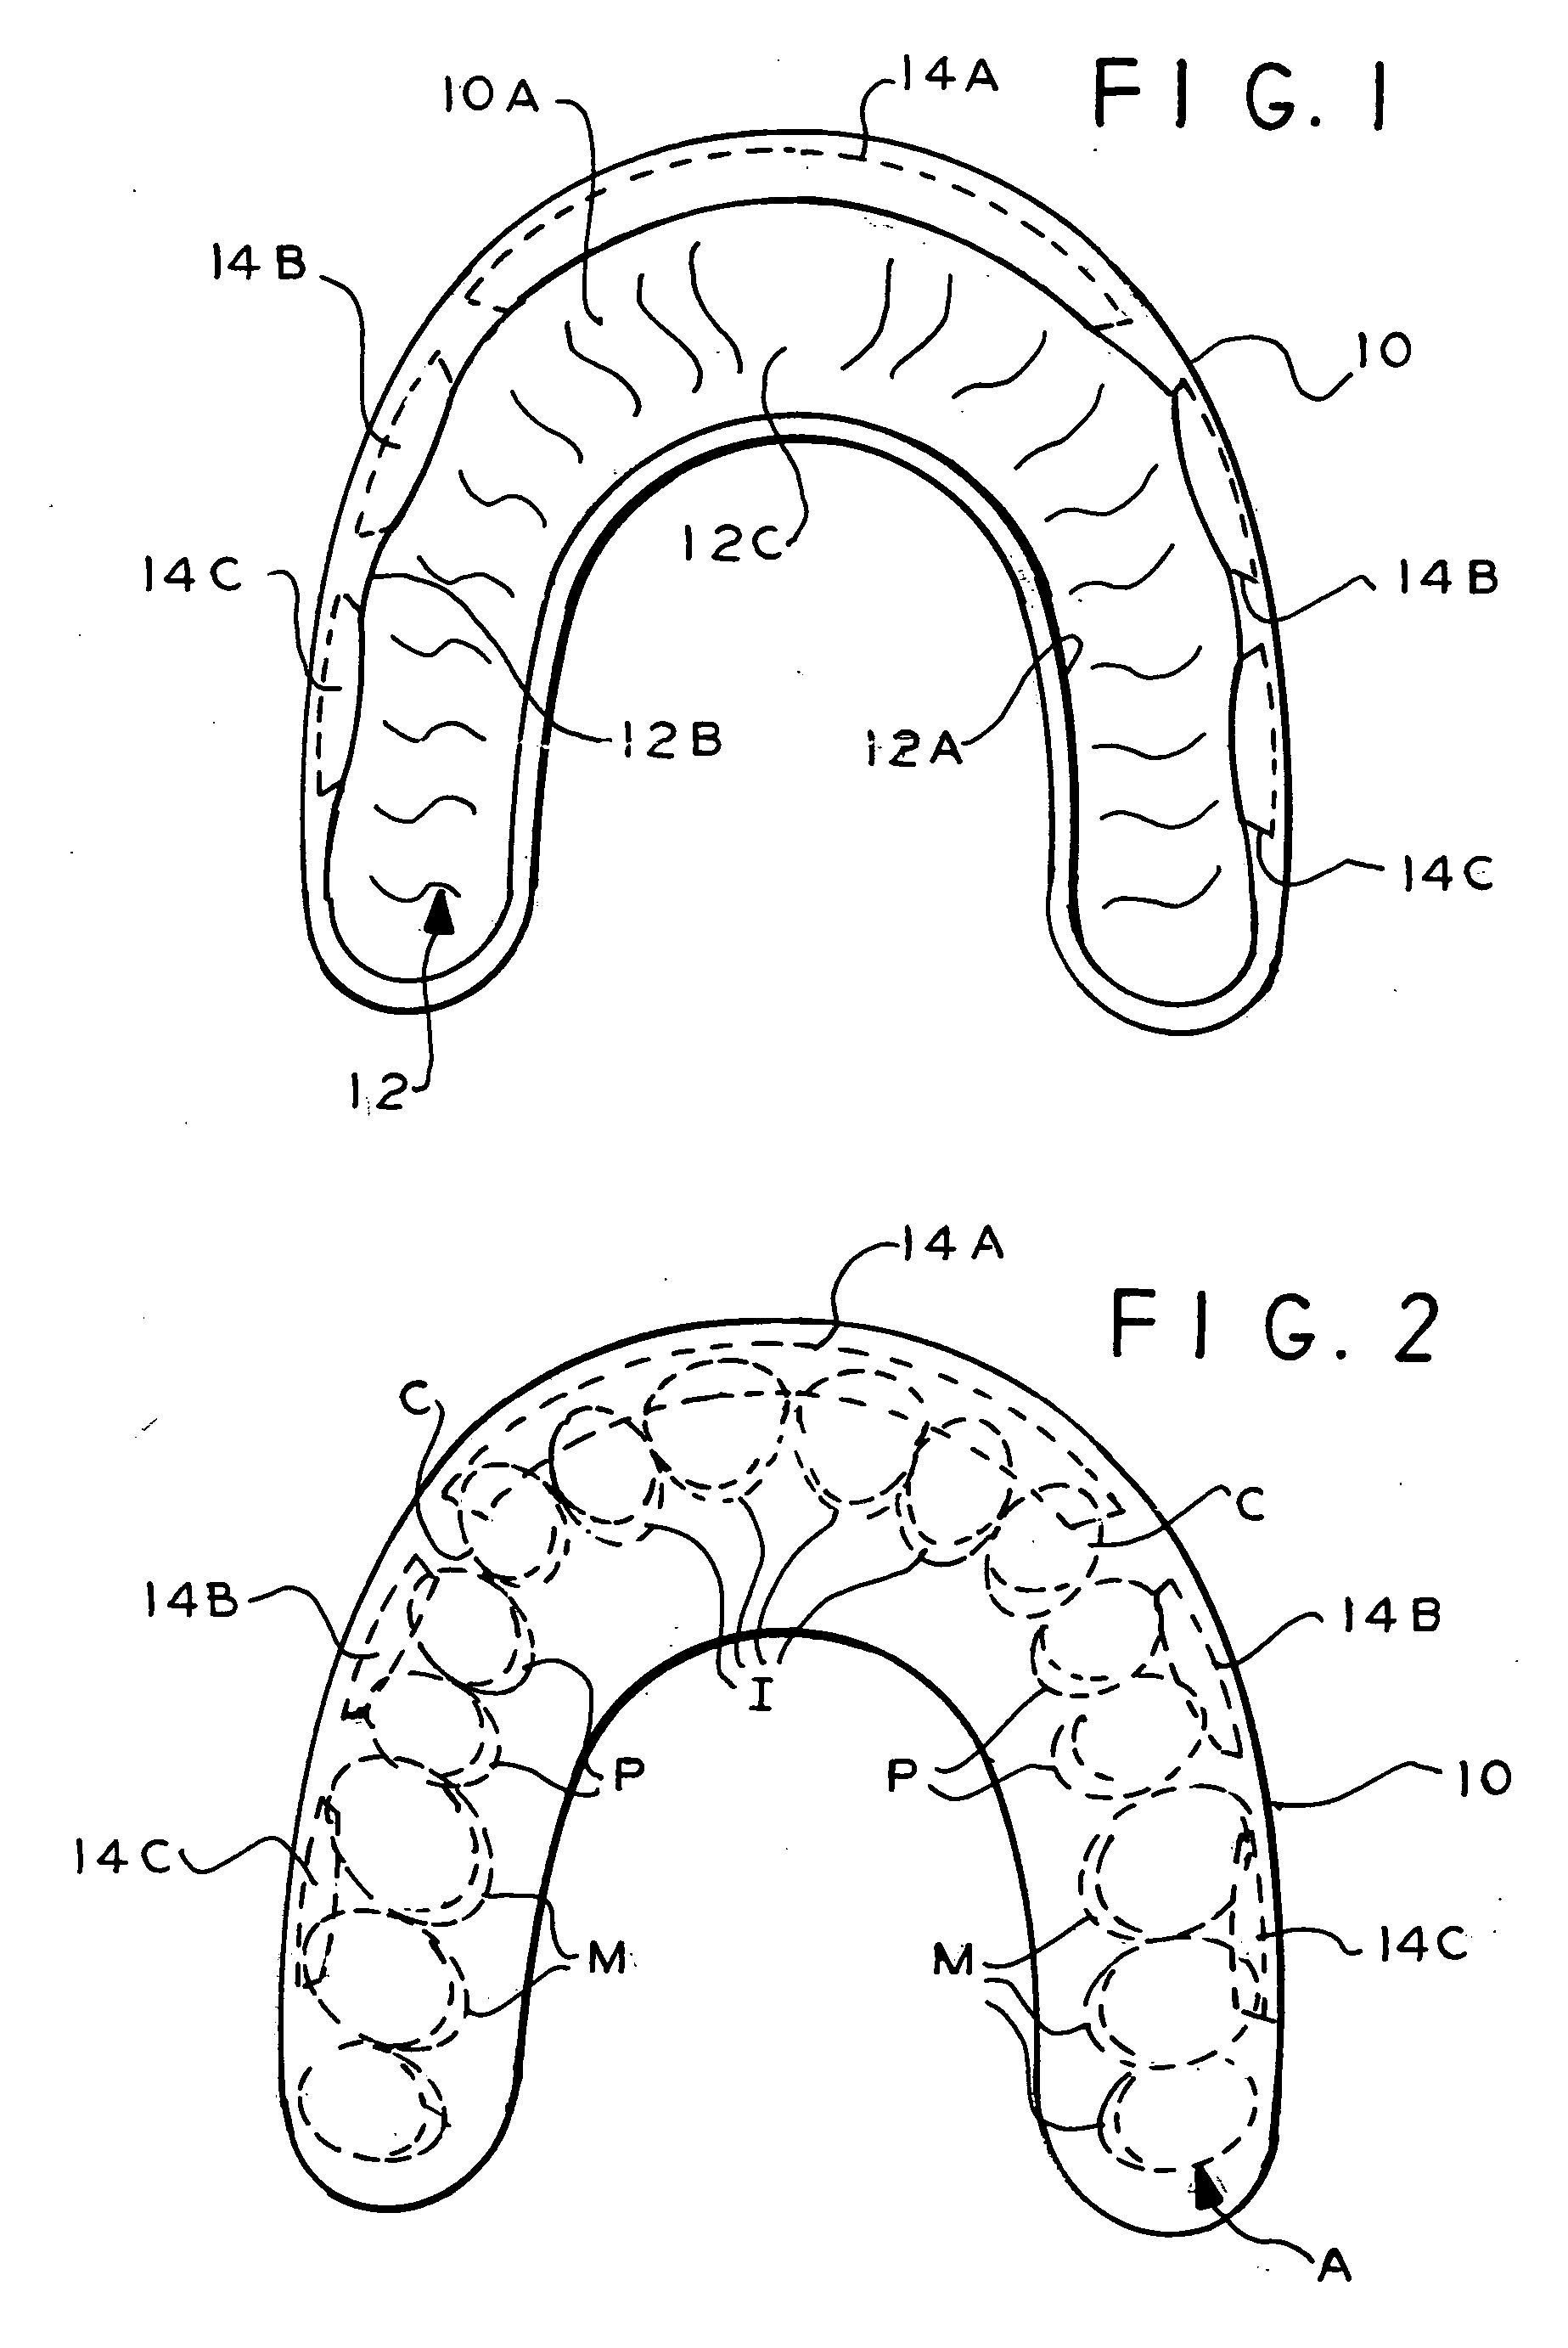 Therapeutic and protective dental device useful as an intra-oral delivery system